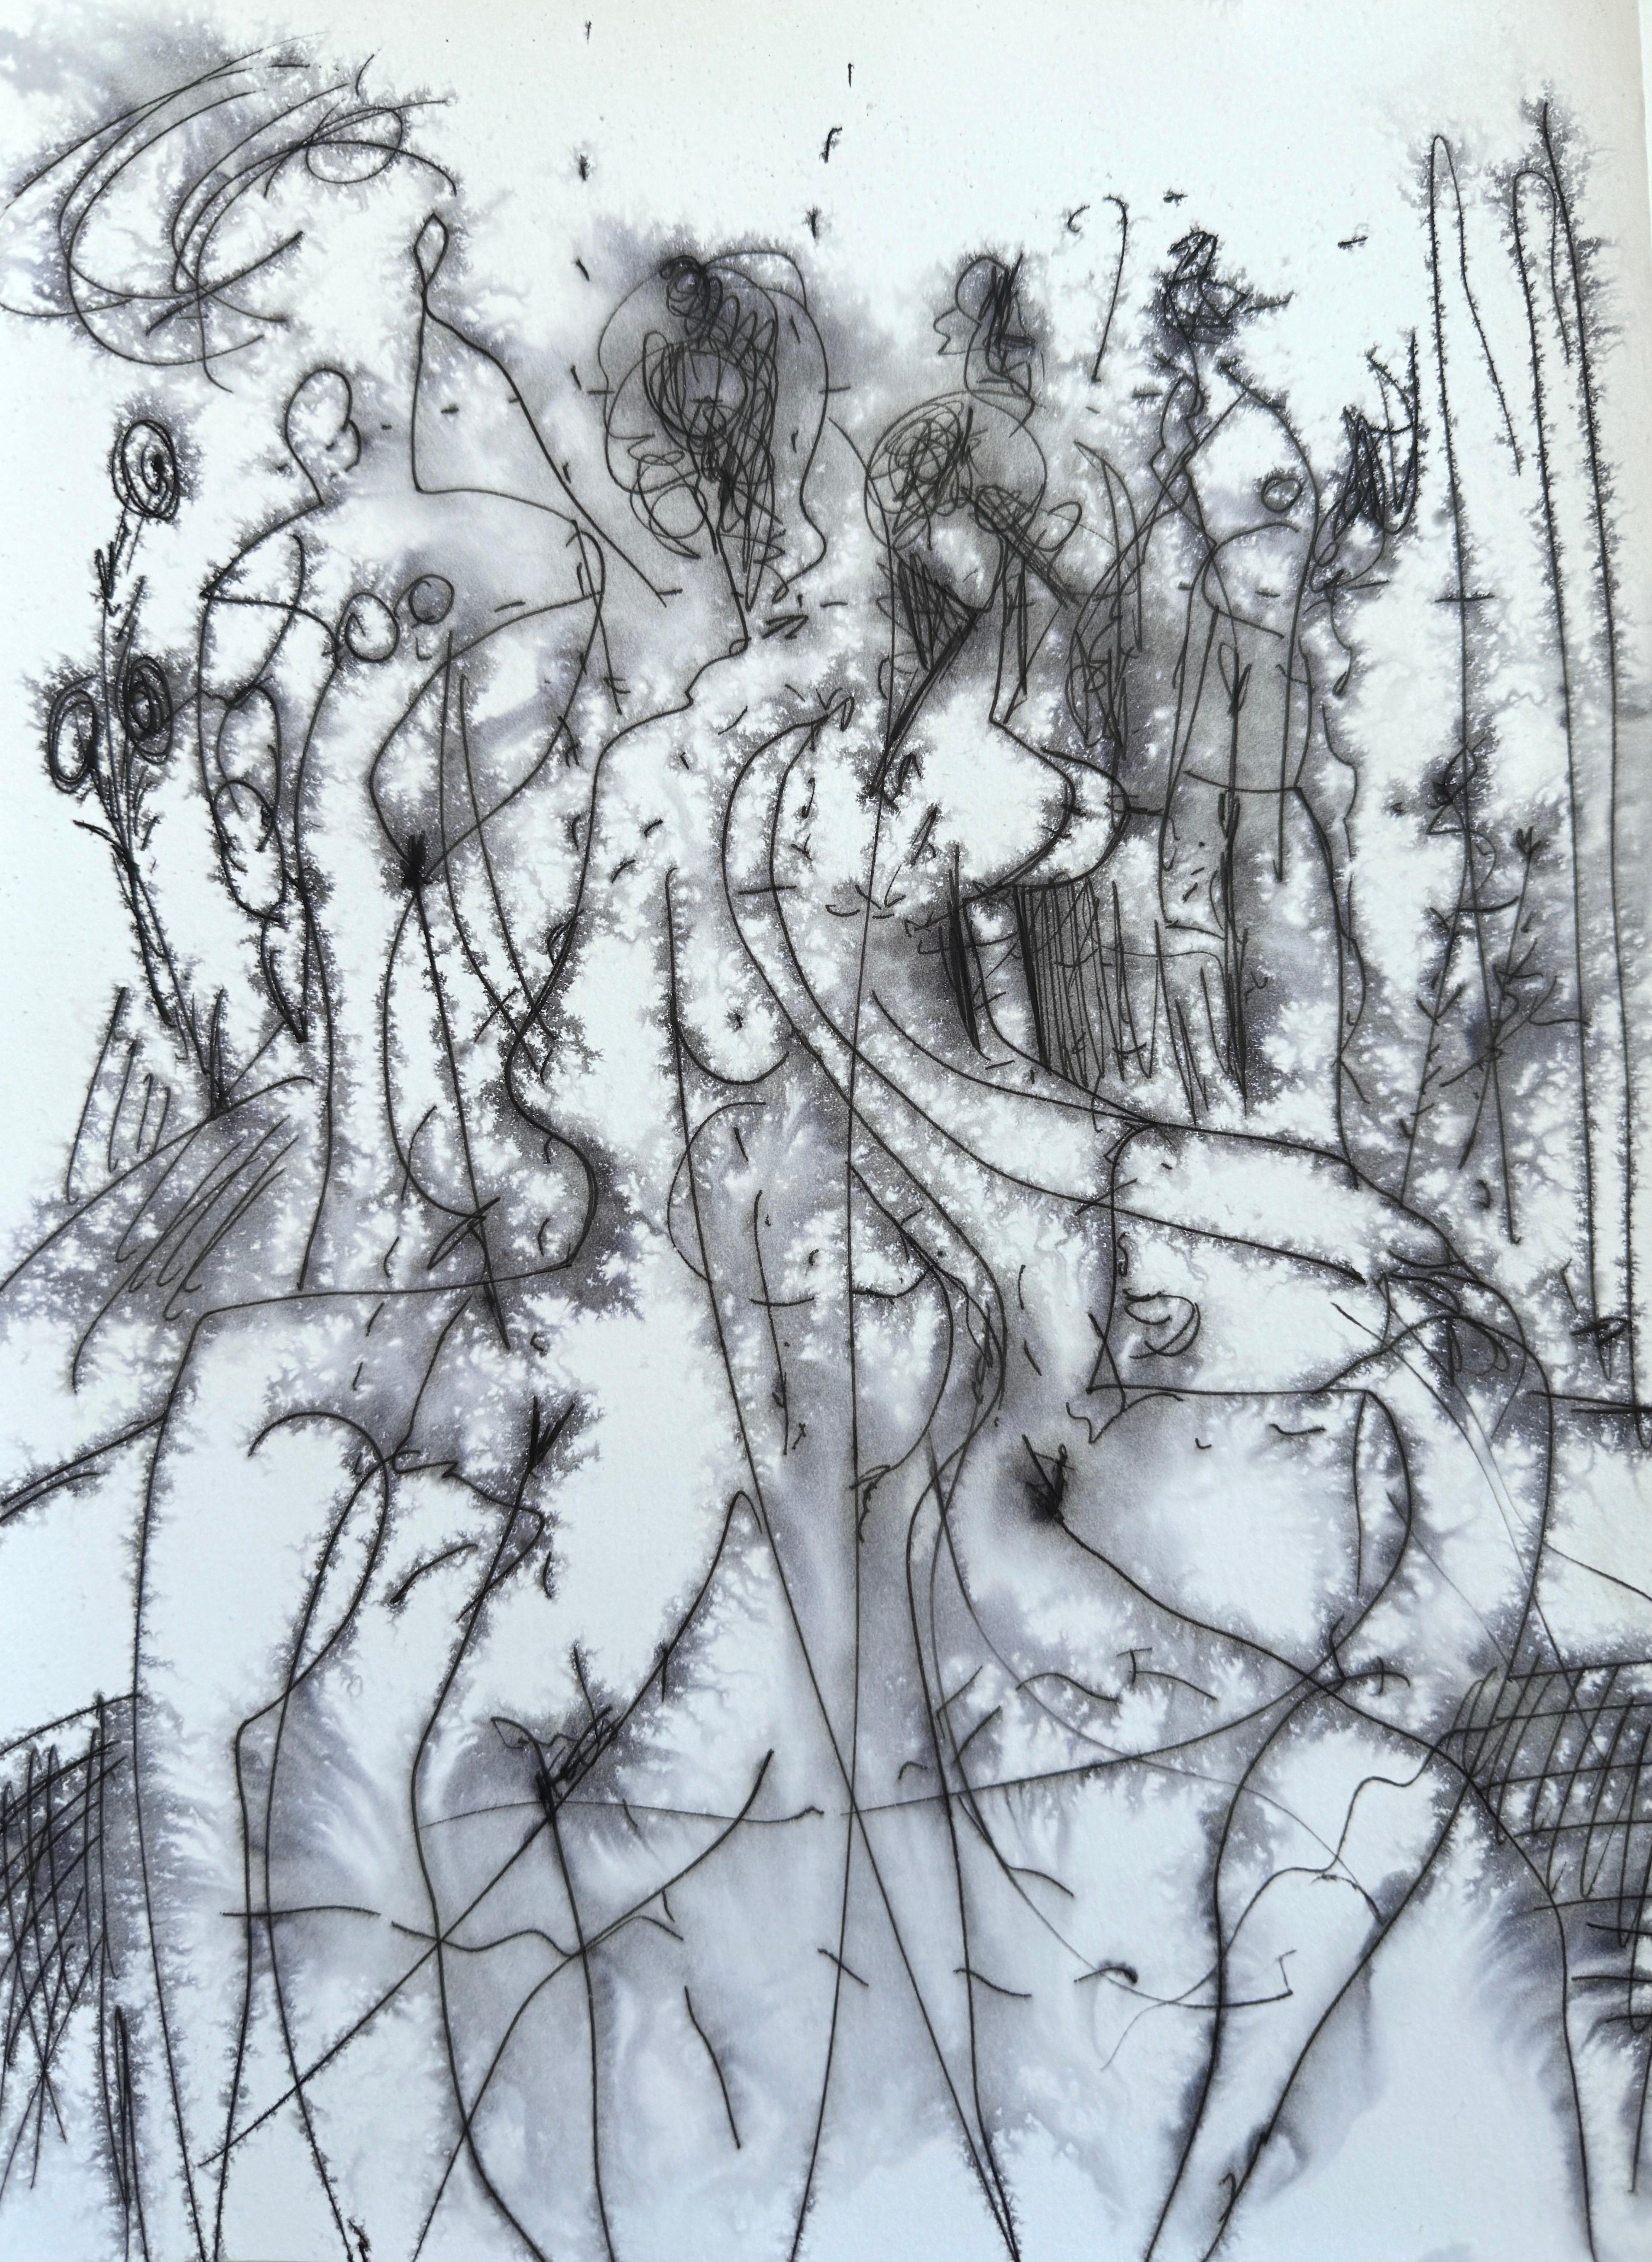 Meeting, Figurative Original Painting, Ink on Paper, Black and White 